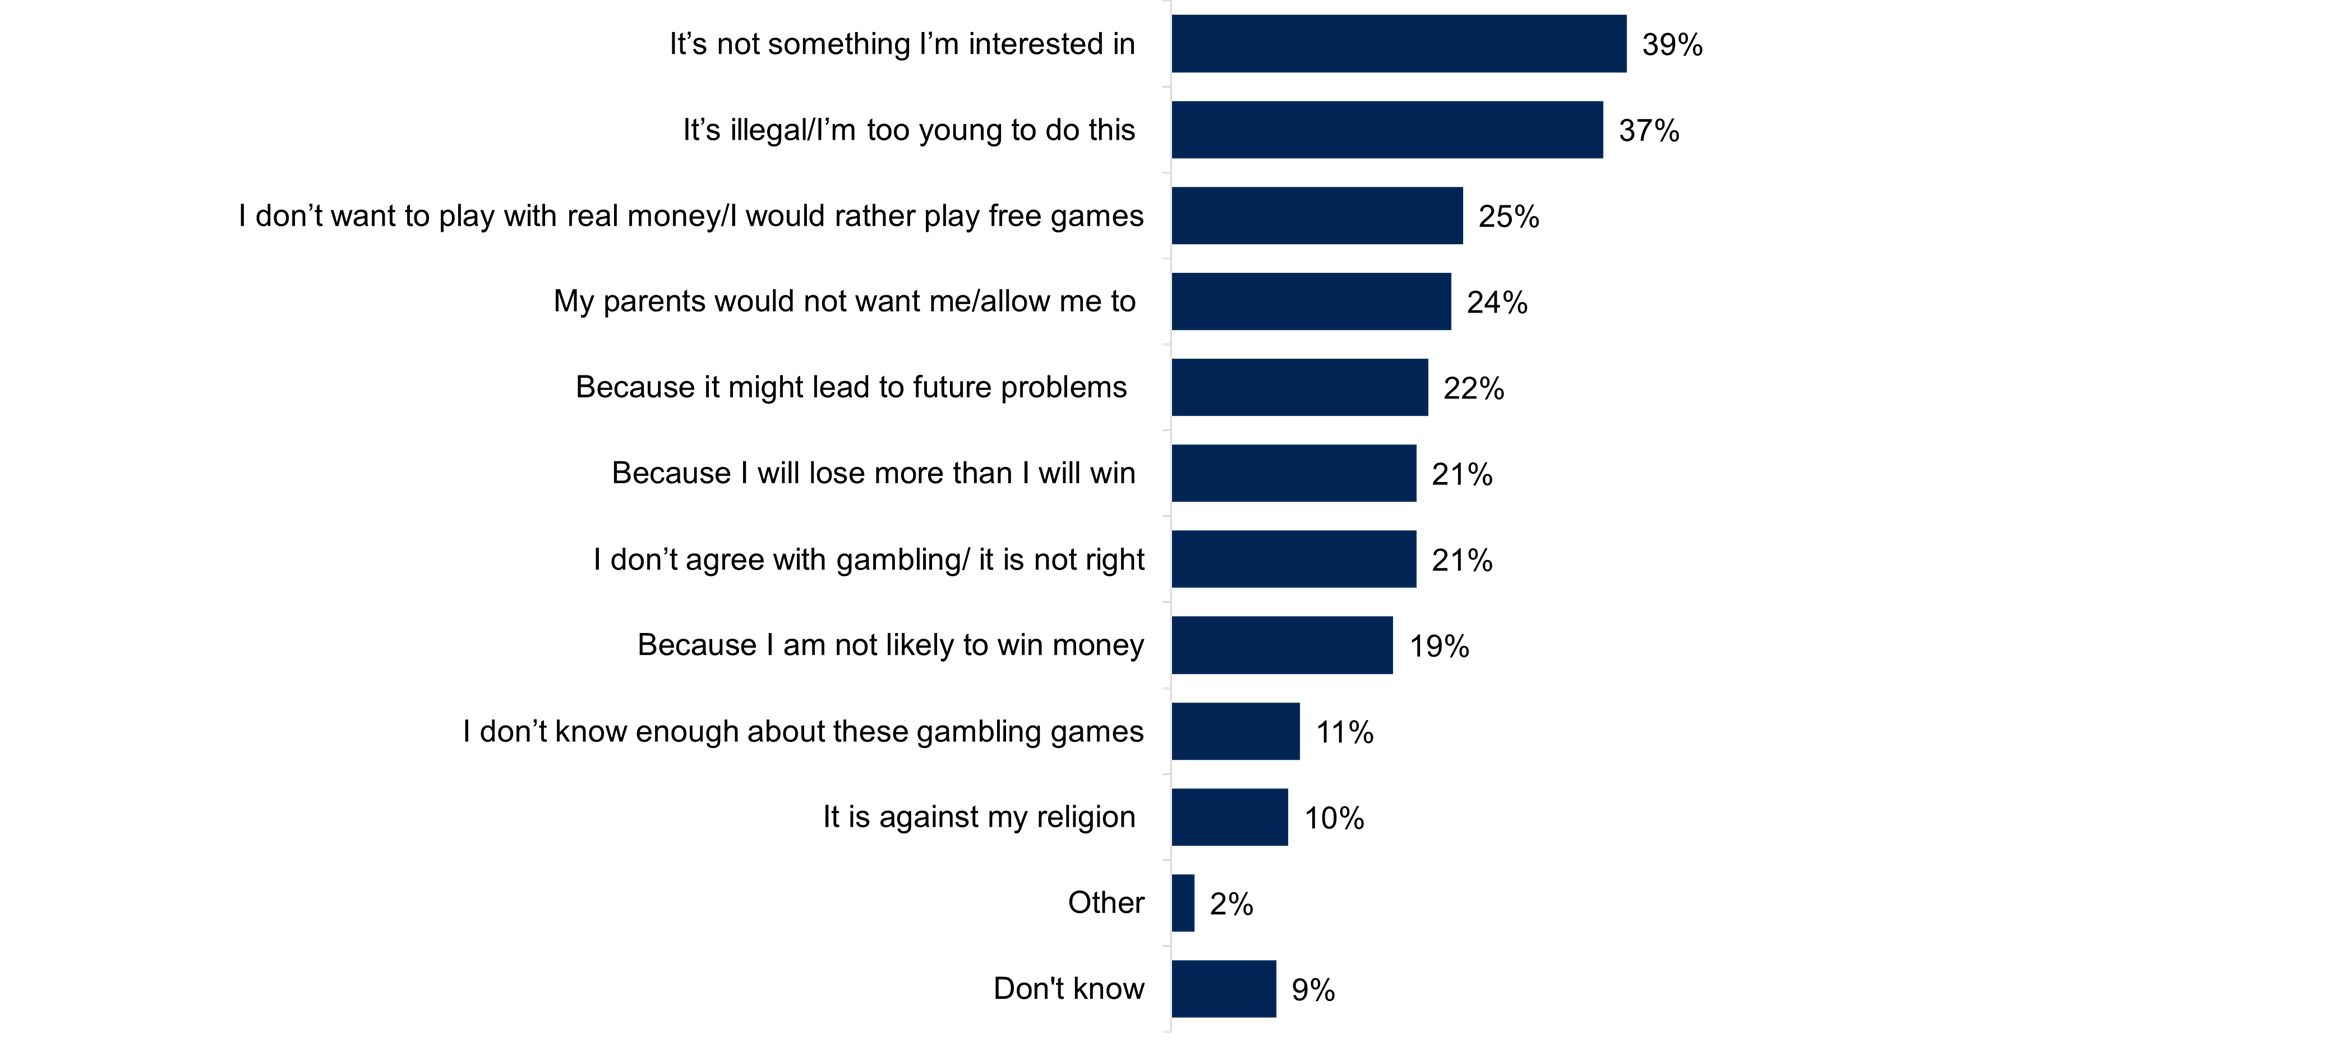 A bar chart showing the top twelve reasons for not gambling. Data from the chart is provided within the following table.